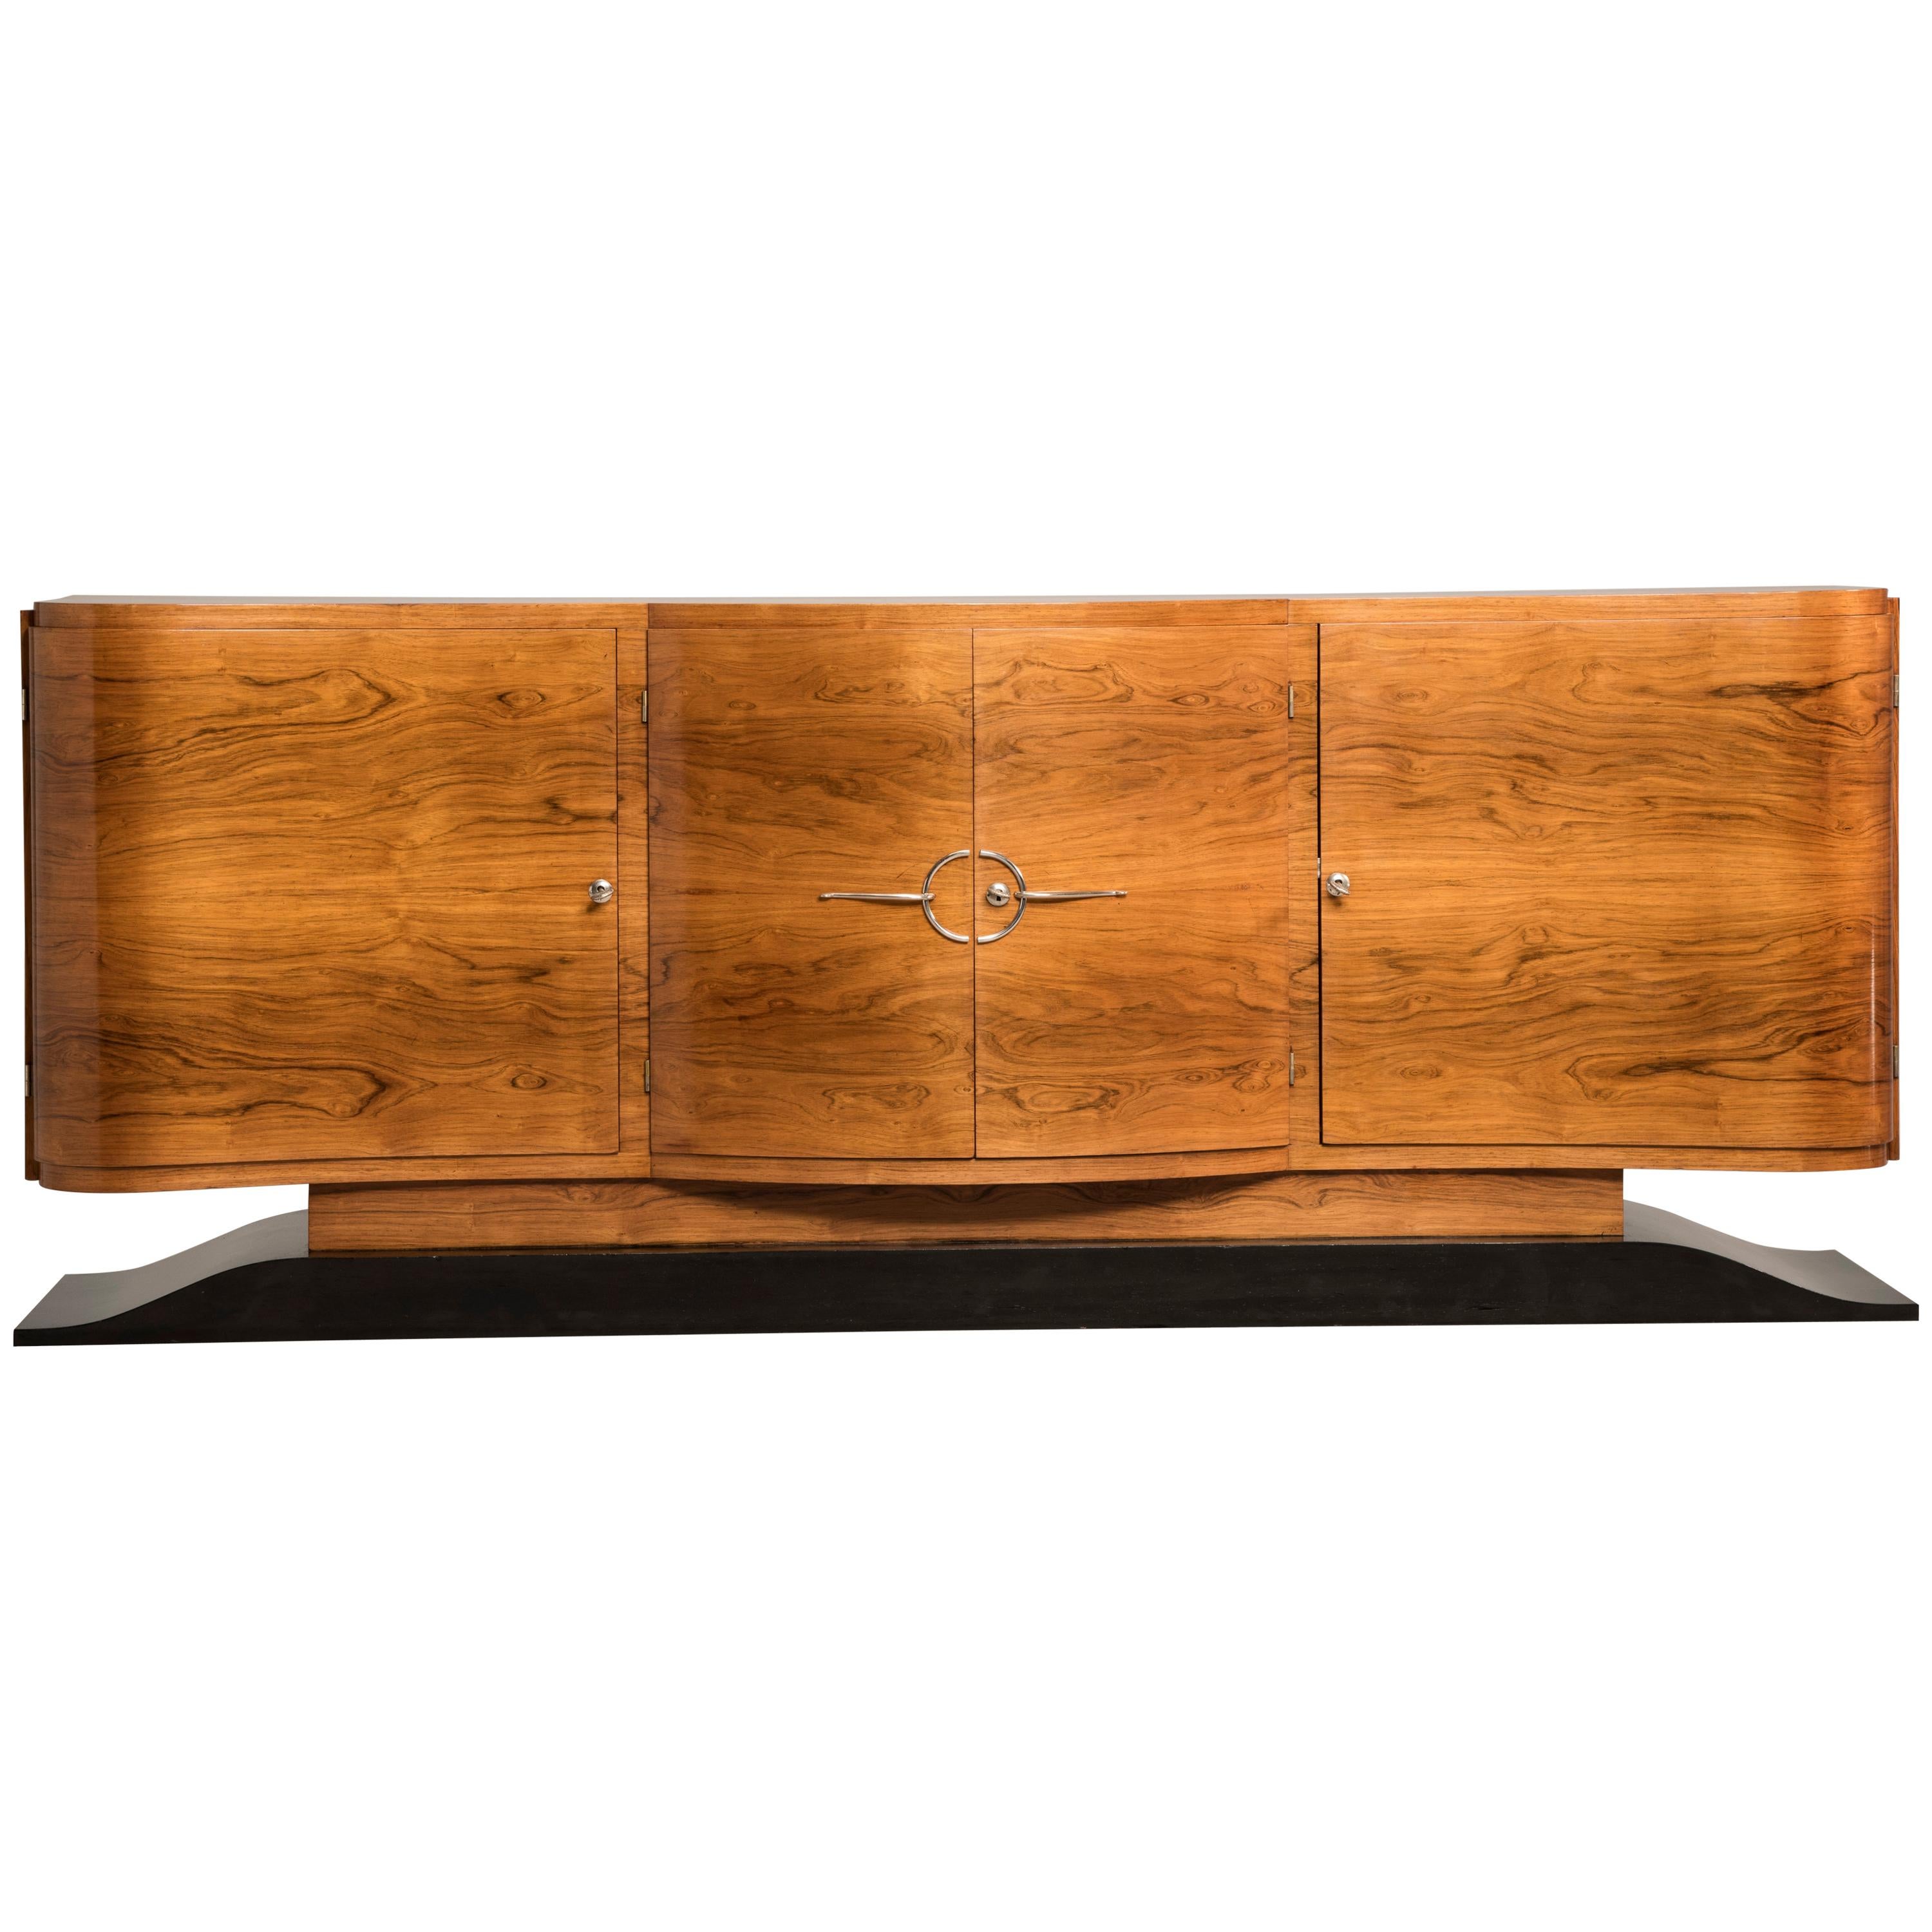 Art Deco Light Rosewood Four doors Black lacquered base Credenza or Sideboard